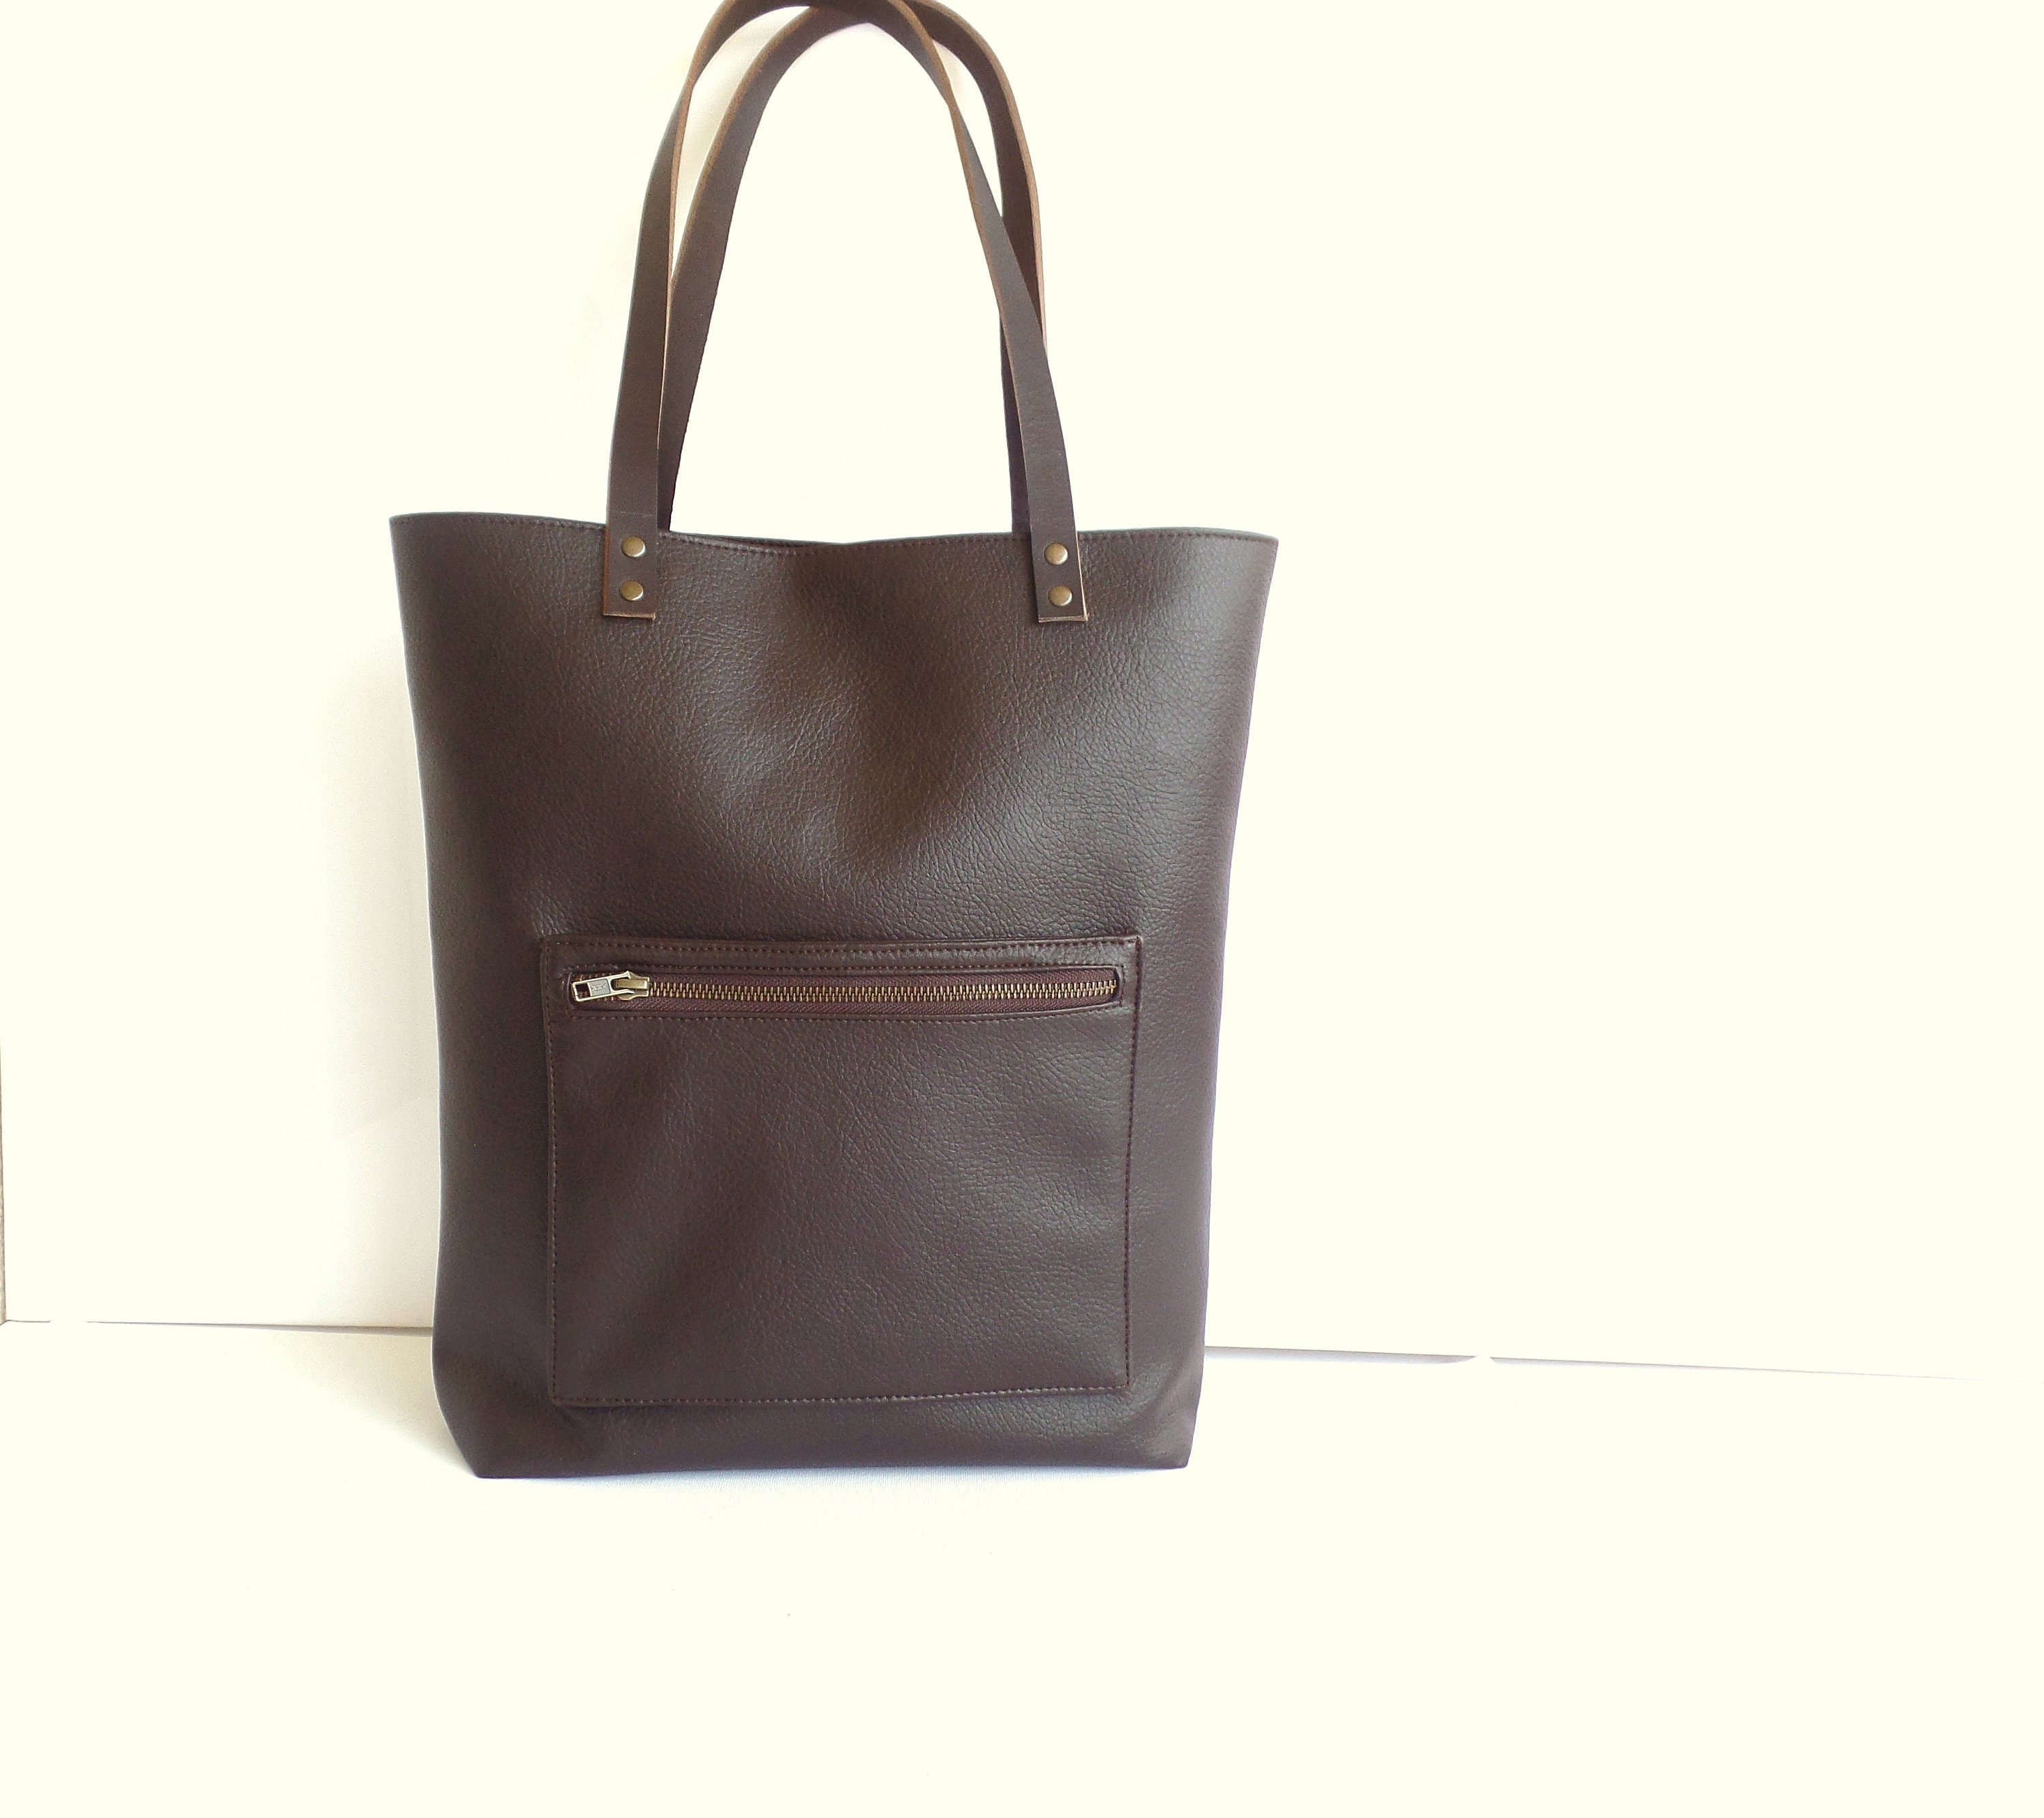 Leather Tote With Trolley Sleeve Leather Bag With Luggage Sleeve